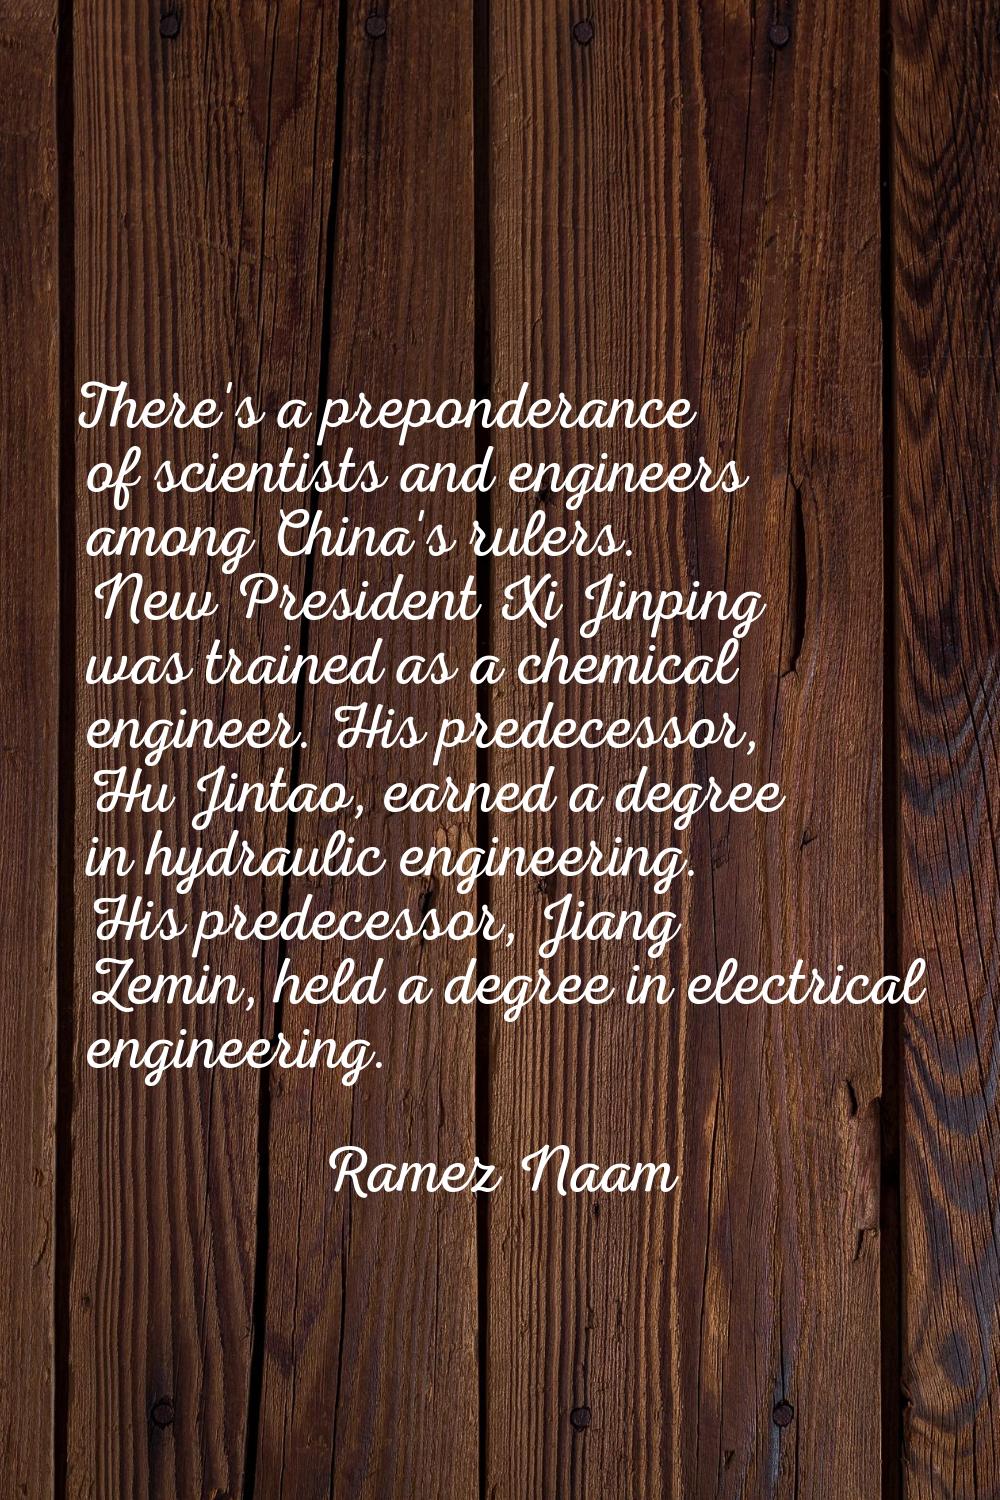 There's a preponderance of scientists and engineers among China's rulers. New President Xi Jinping 